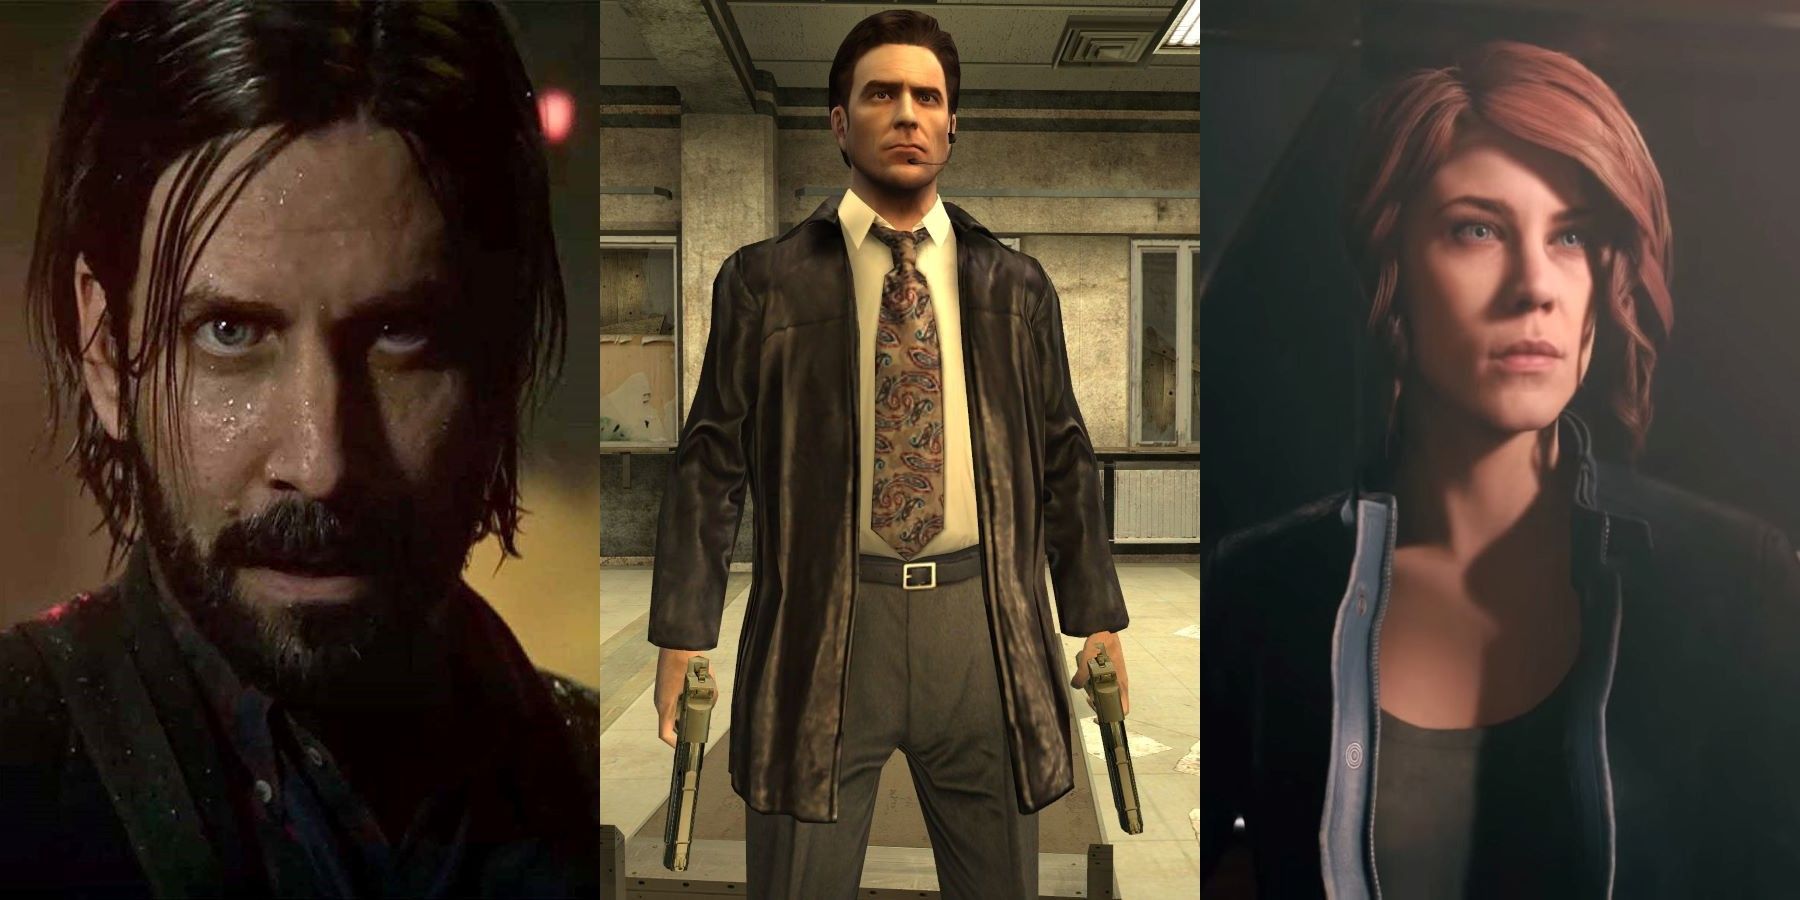 Remedy's Alan Wake in Alan Wake 2, Max Payne in Max Payne 2, and Jesse Faden in Control